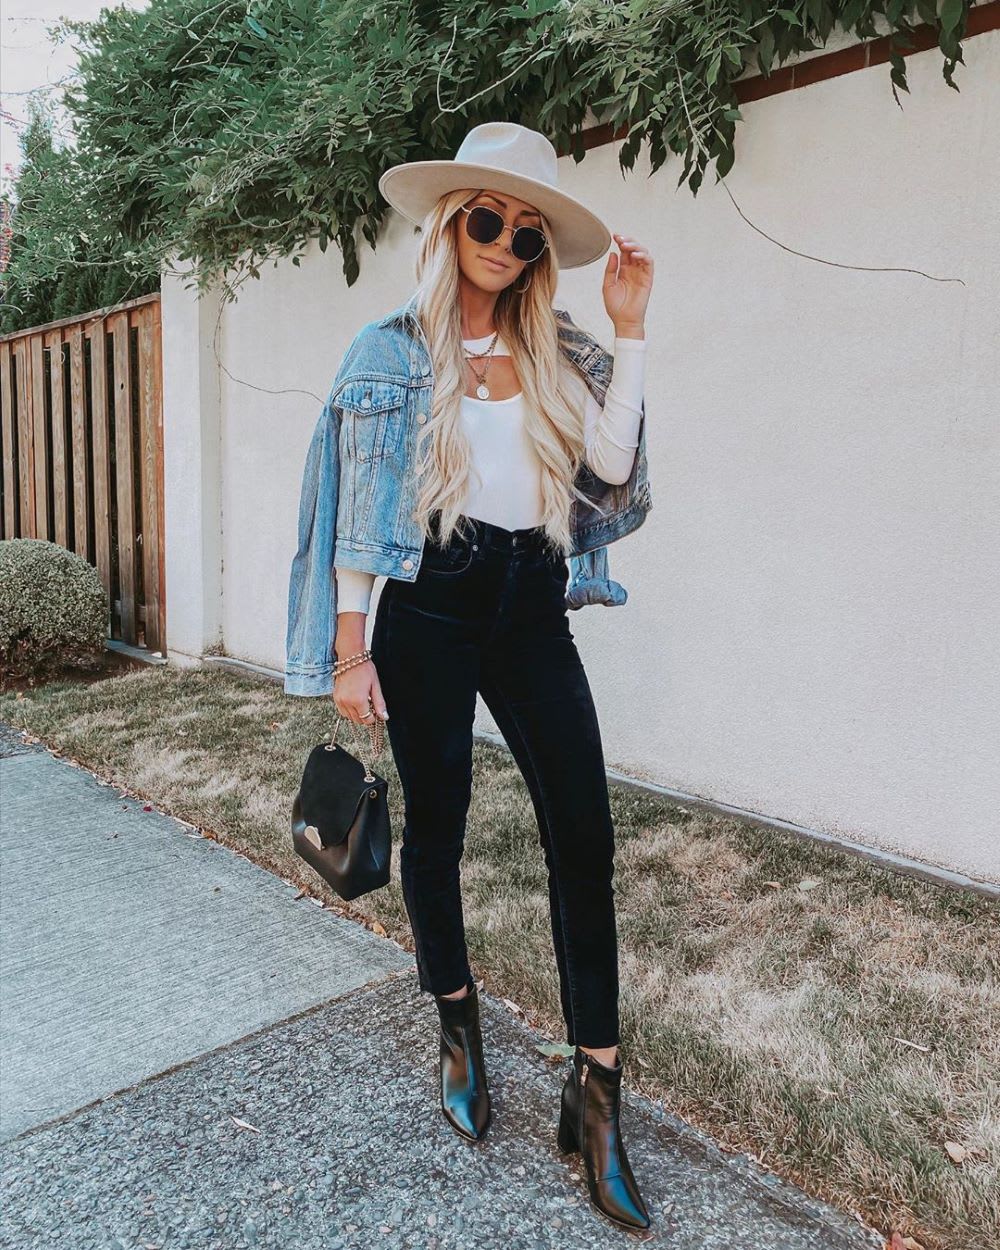 How To Wear A Denim Jacket: 7 Outfit Ideas To Try This Season - Lulus.com  Fashion Blog